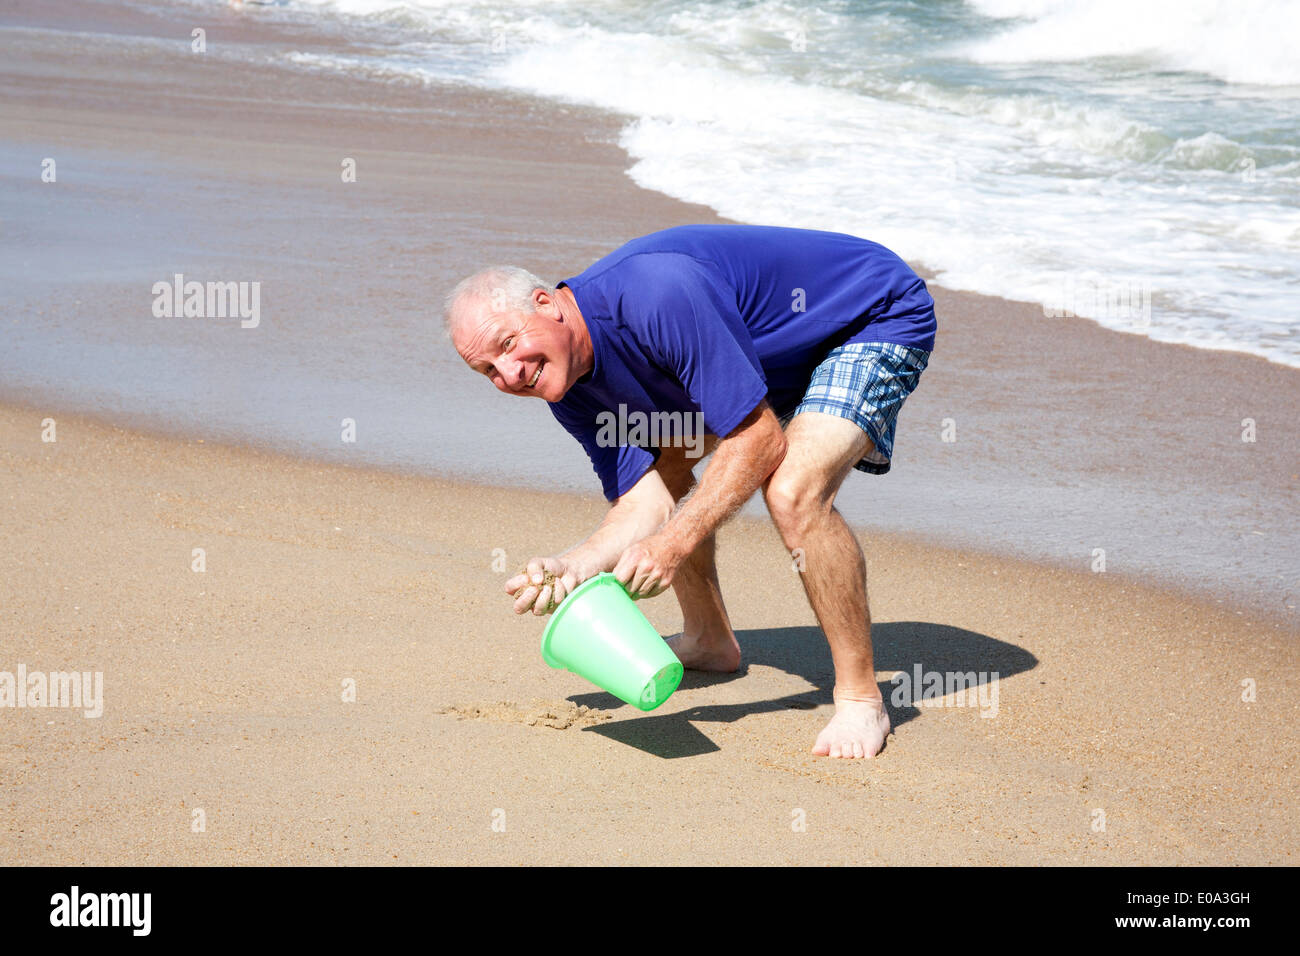 Man collecting sand in a pail while acting childish at the shore Stock Photo